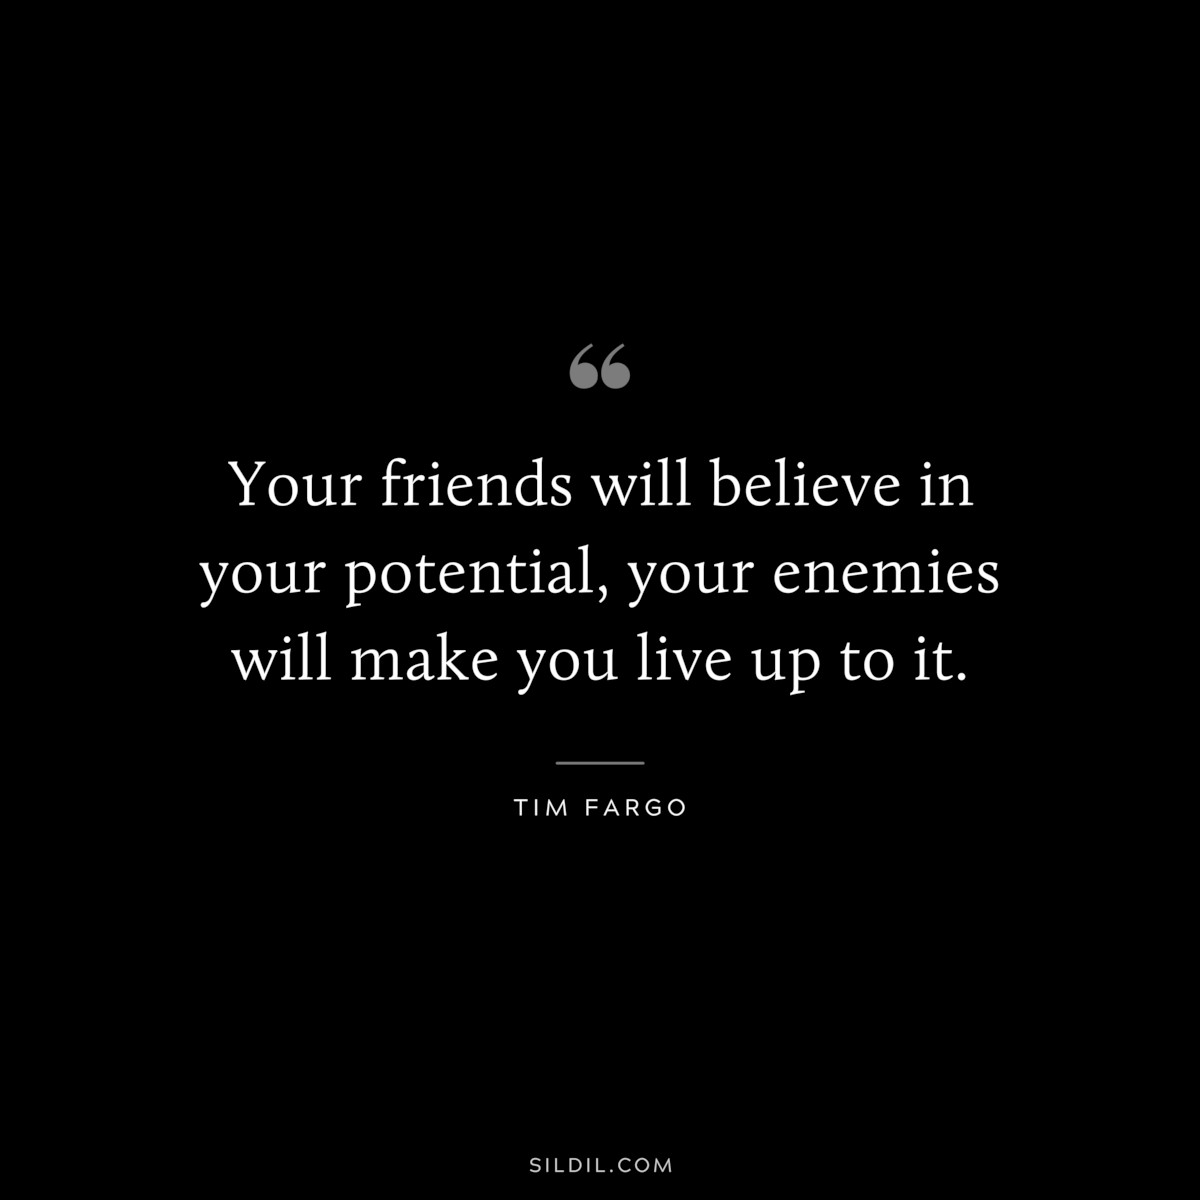 Your friends will believe in your potential, your enemies will make you live up to it. ― Tim Fargo